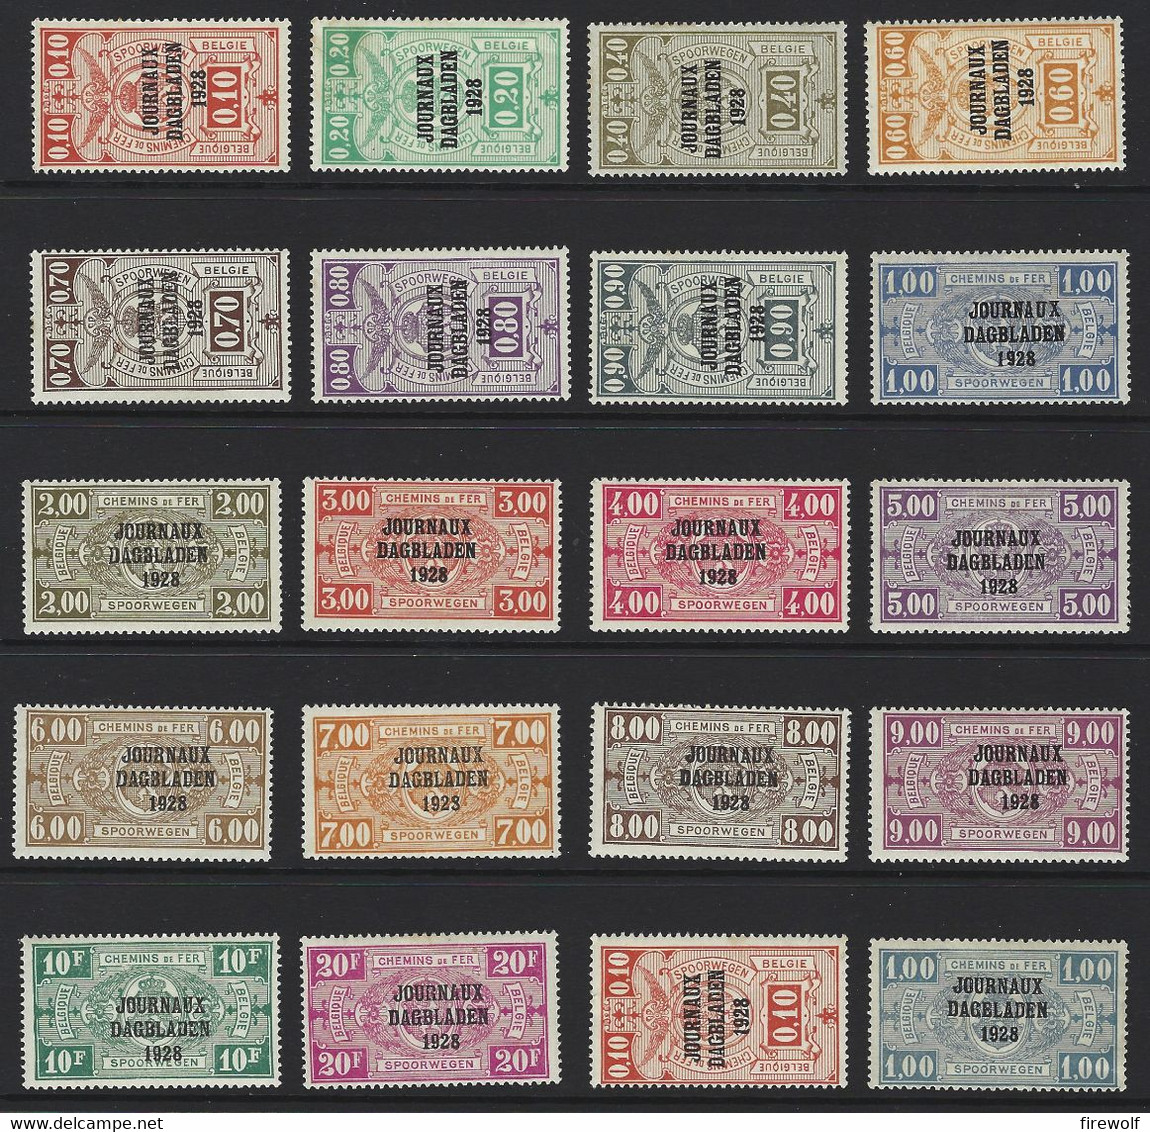 A13 - Belgium - 1928 - Railways Parcel Stamps With Surcharge Journaux Dagbladen 1928 - Mix MH/MNH - Newspaper [JO]